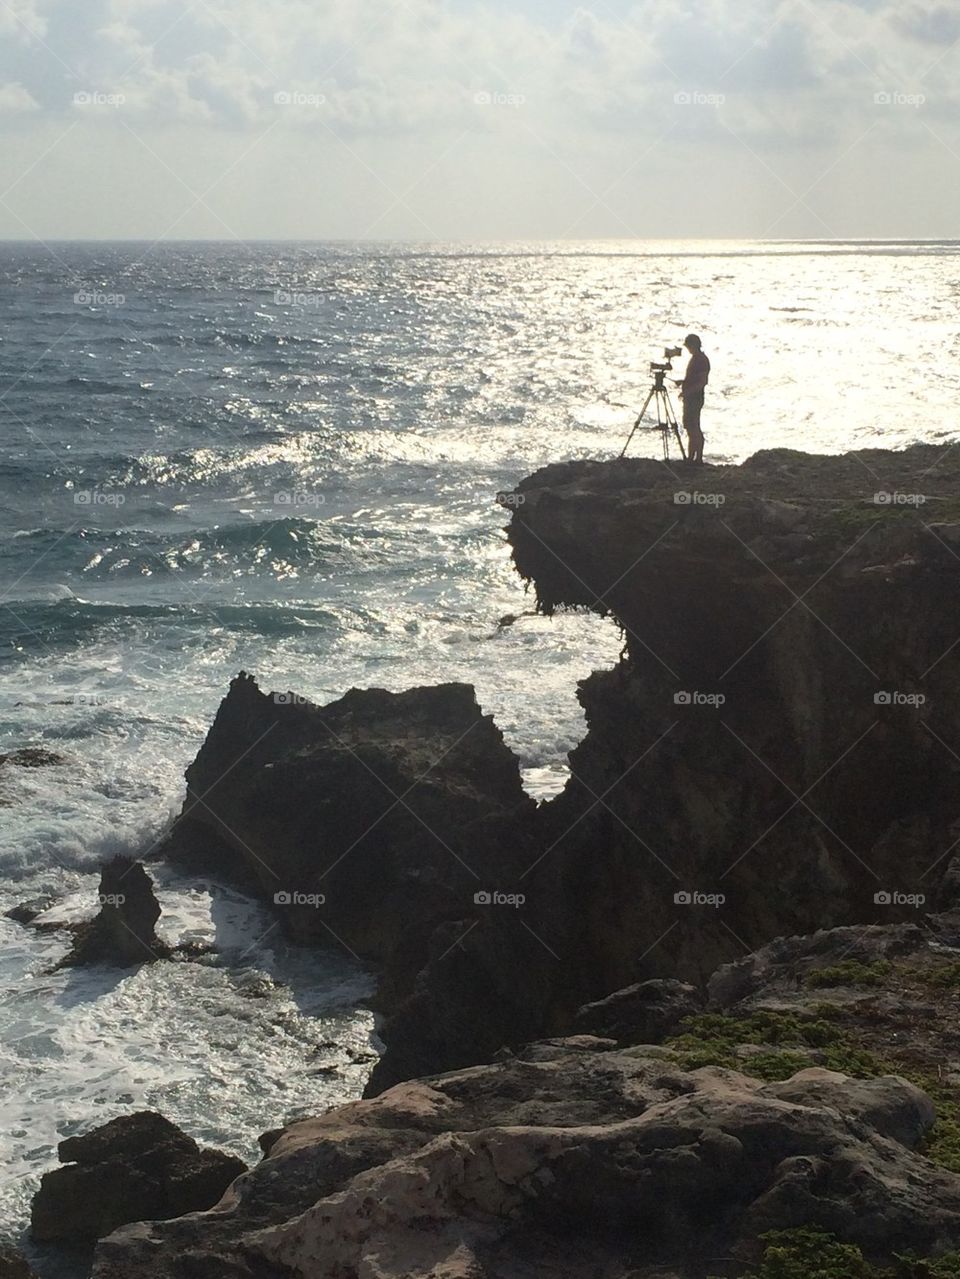 Cliff side Photographer